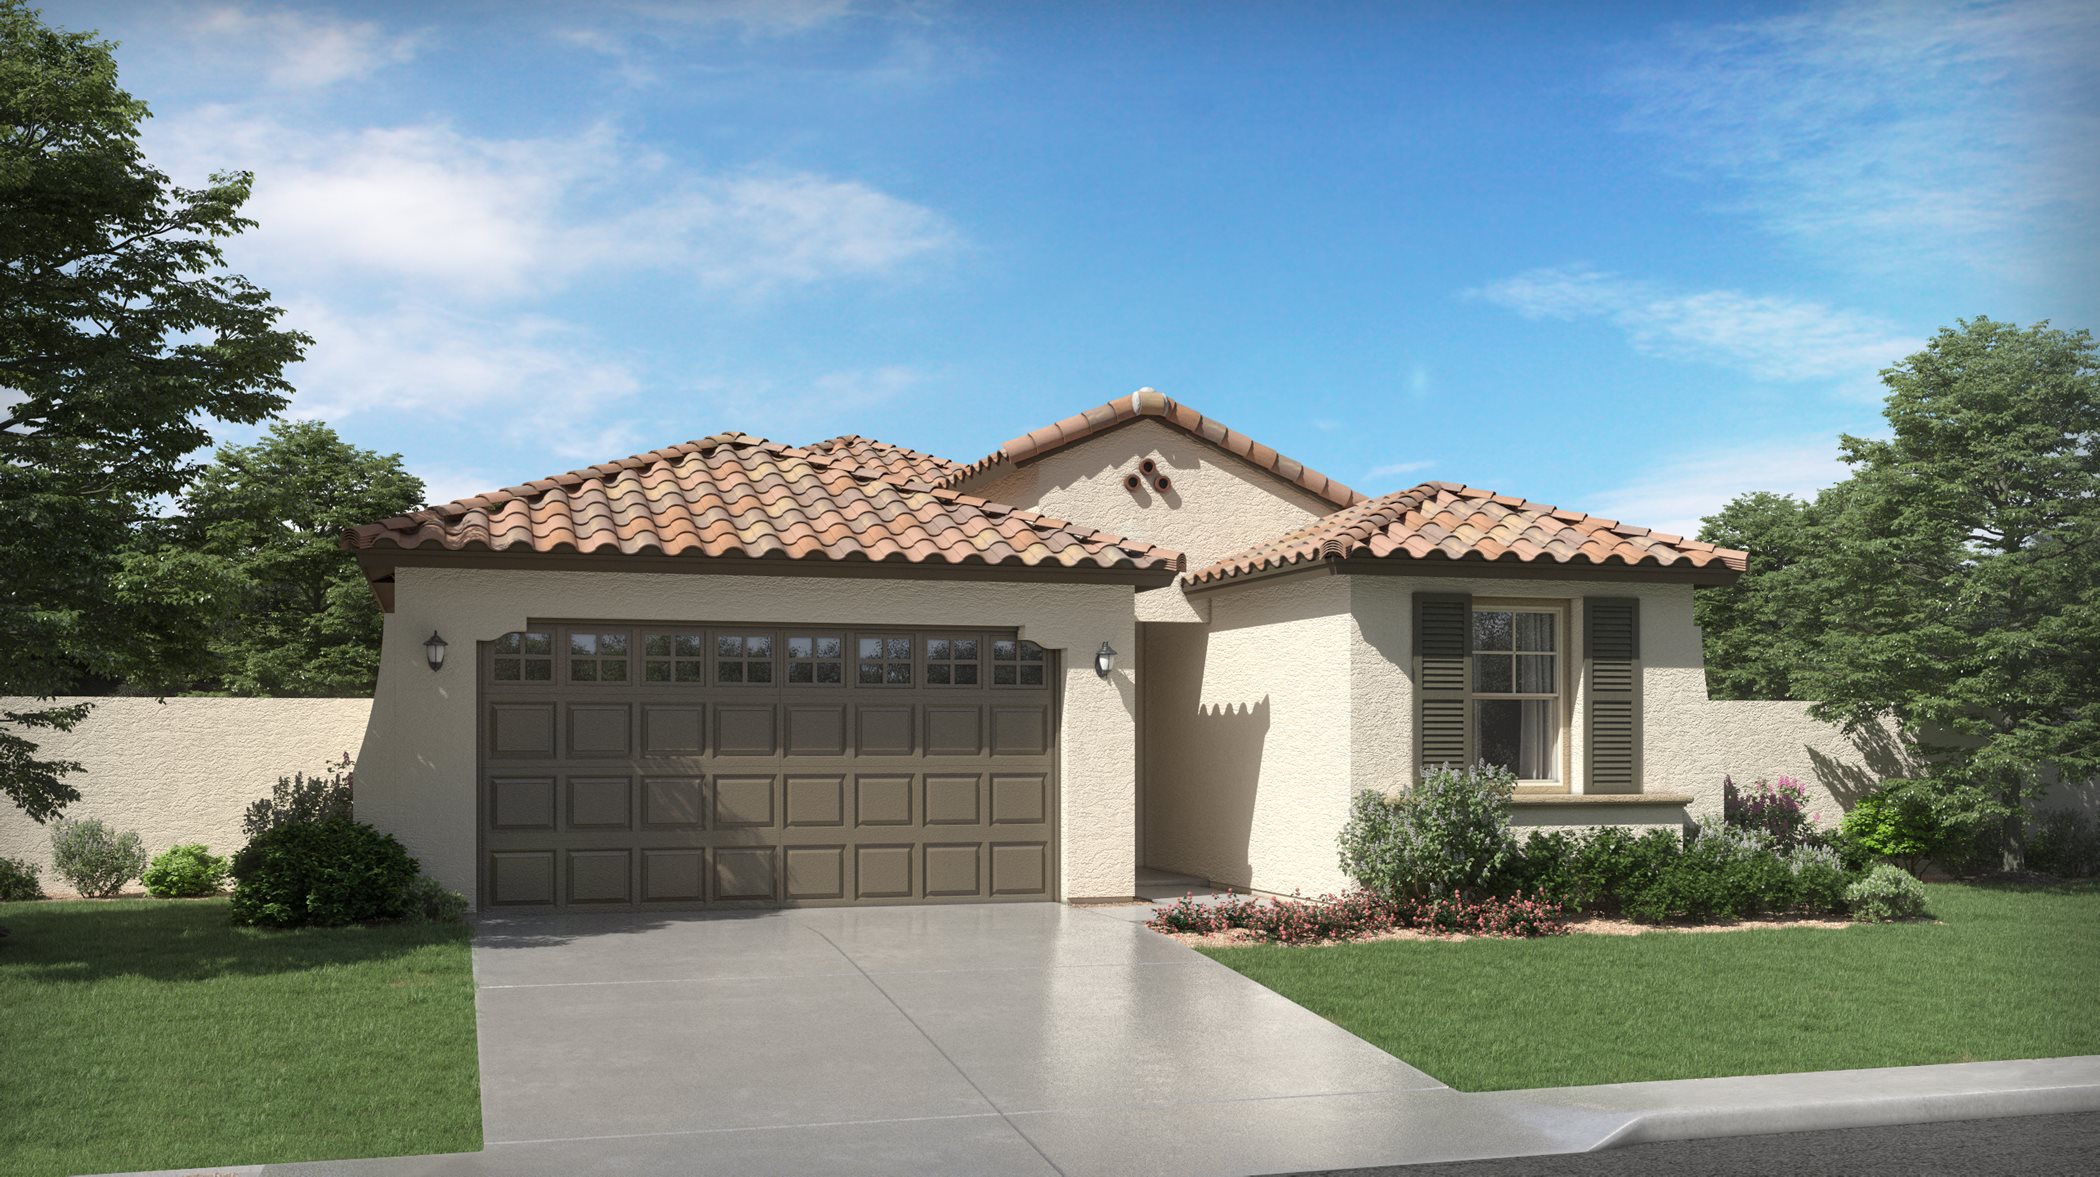 Spanish Colonial Exterior for Plan 3575